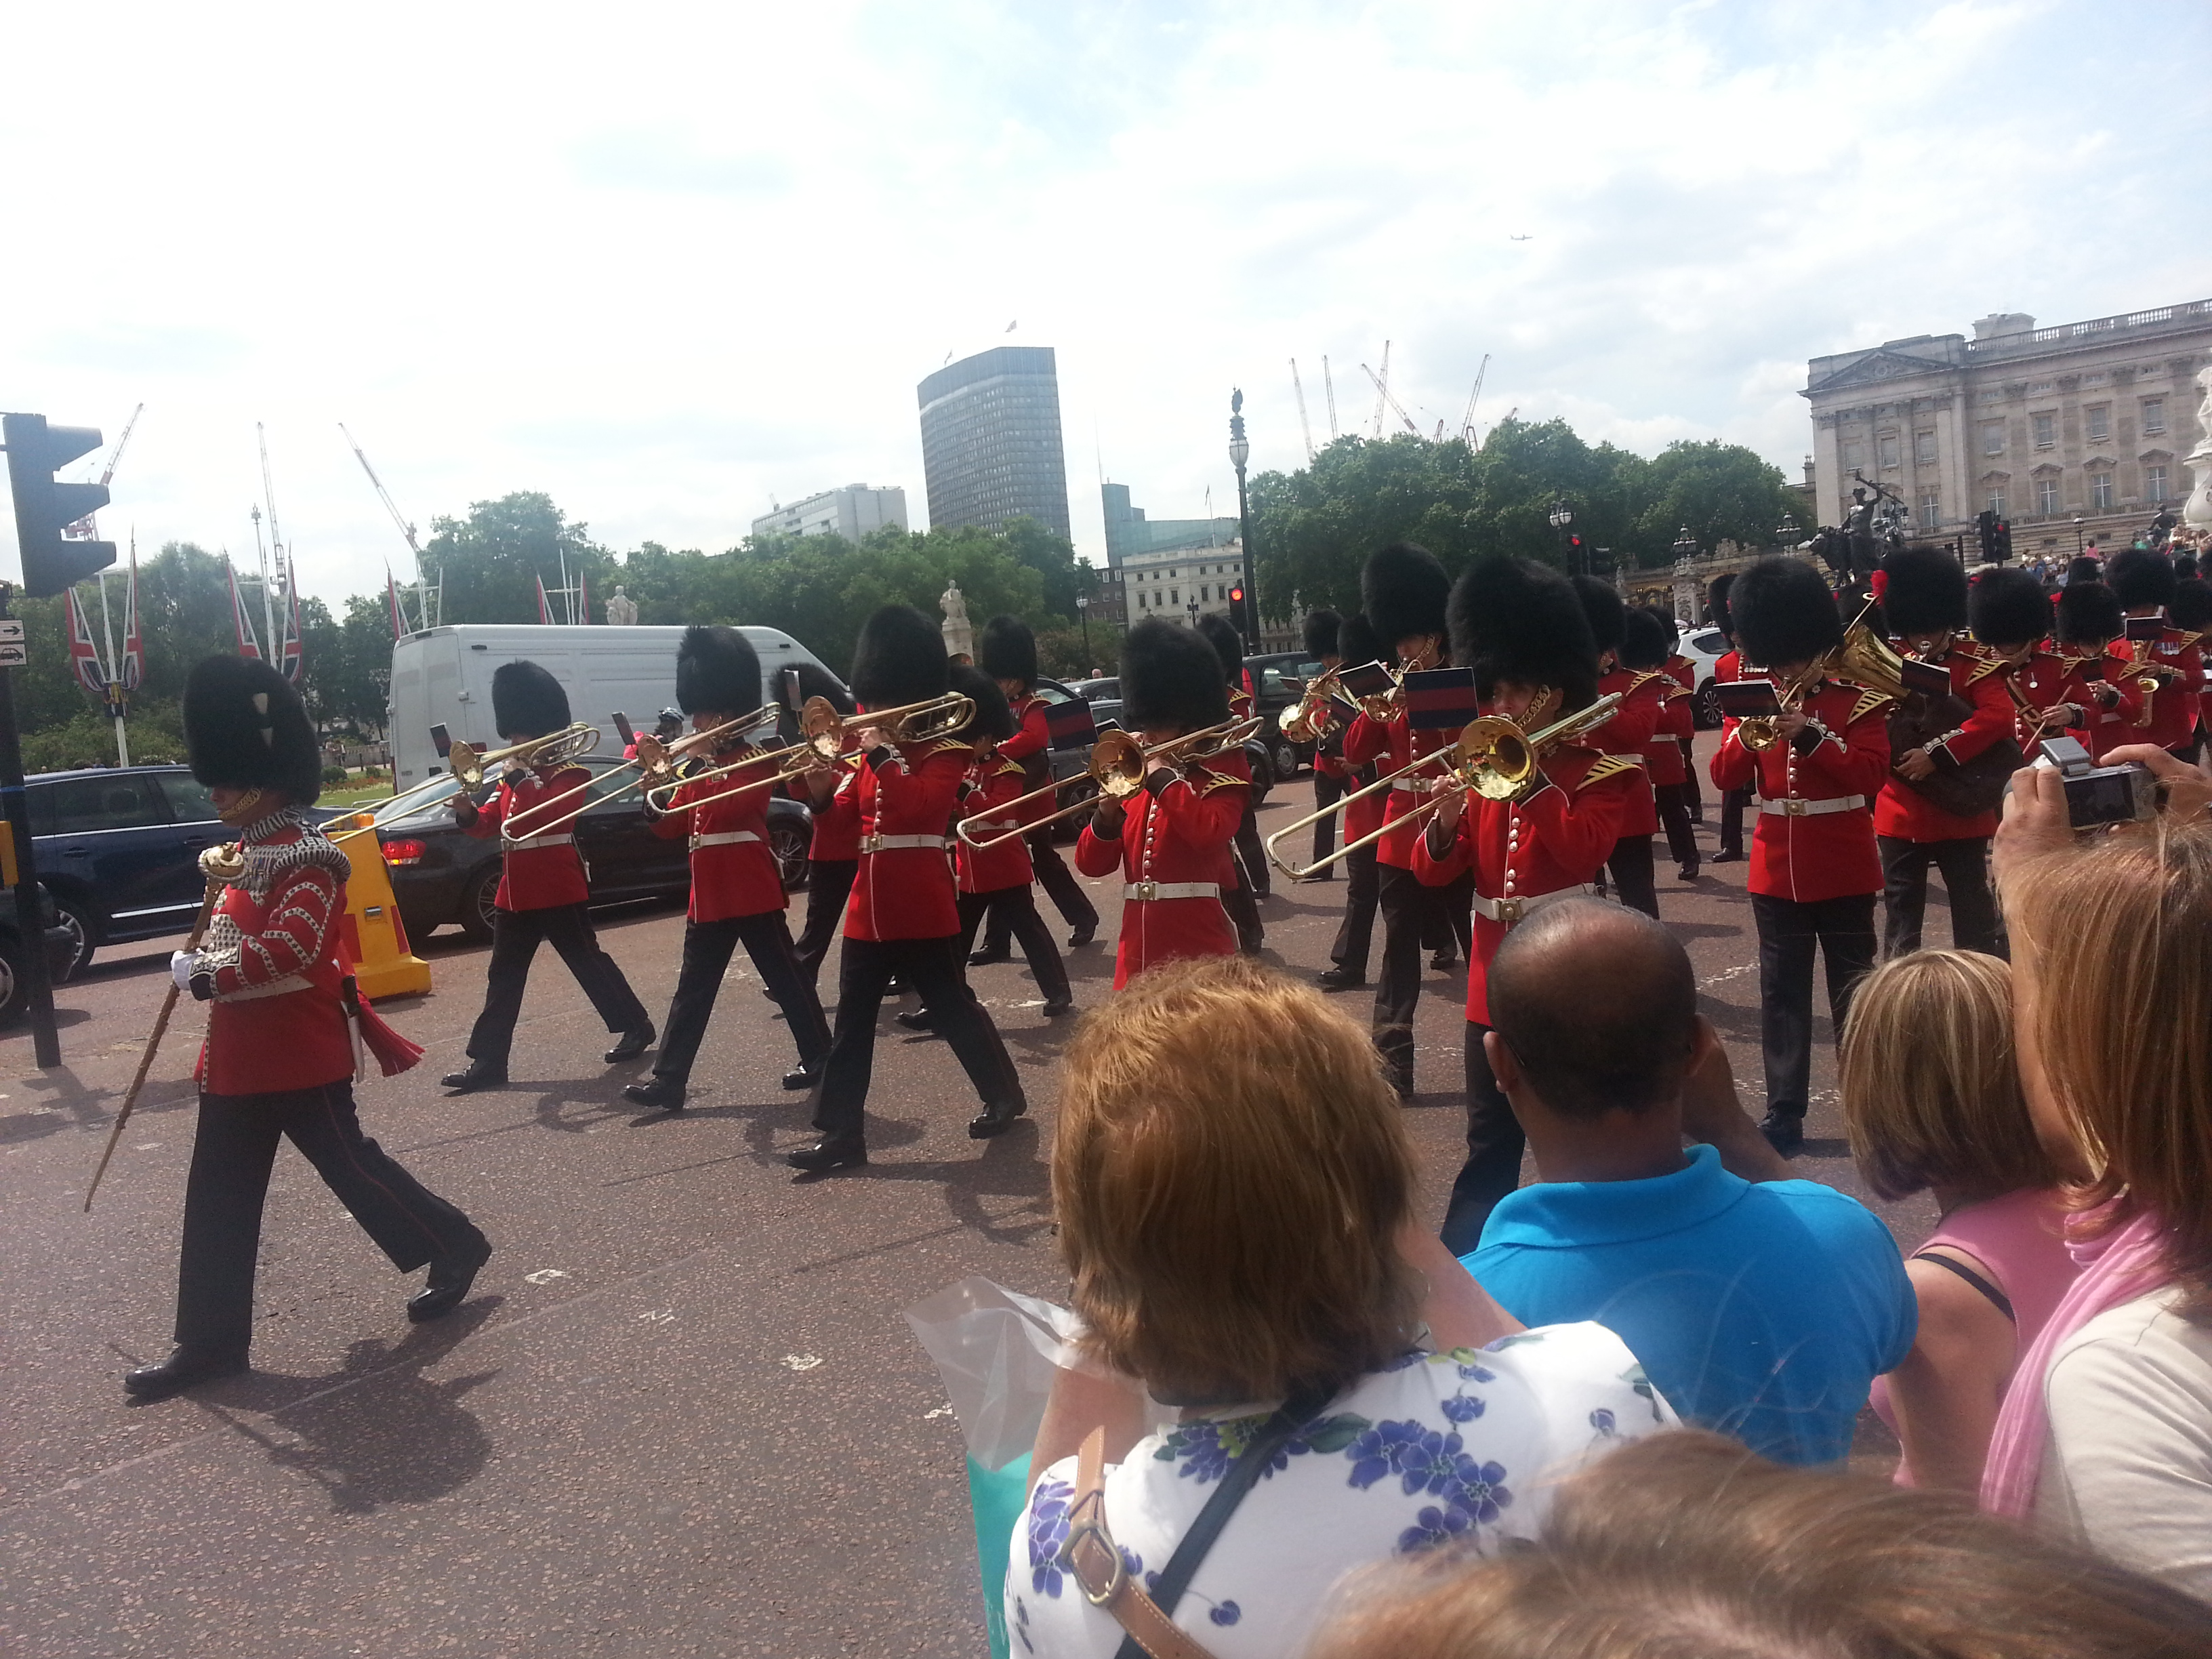 2014 Europe Trip Day 10 - England (J.K. Rowling Home, Changing of the Guard - Buckingham Palace, Hamleys of London (Oldest & Largest Toy Shop in World), Piccadilly Circus, Leicester Square, Trafalgar Square, Big Ben, Indian Food, Tunnock's Caramel Wafers)